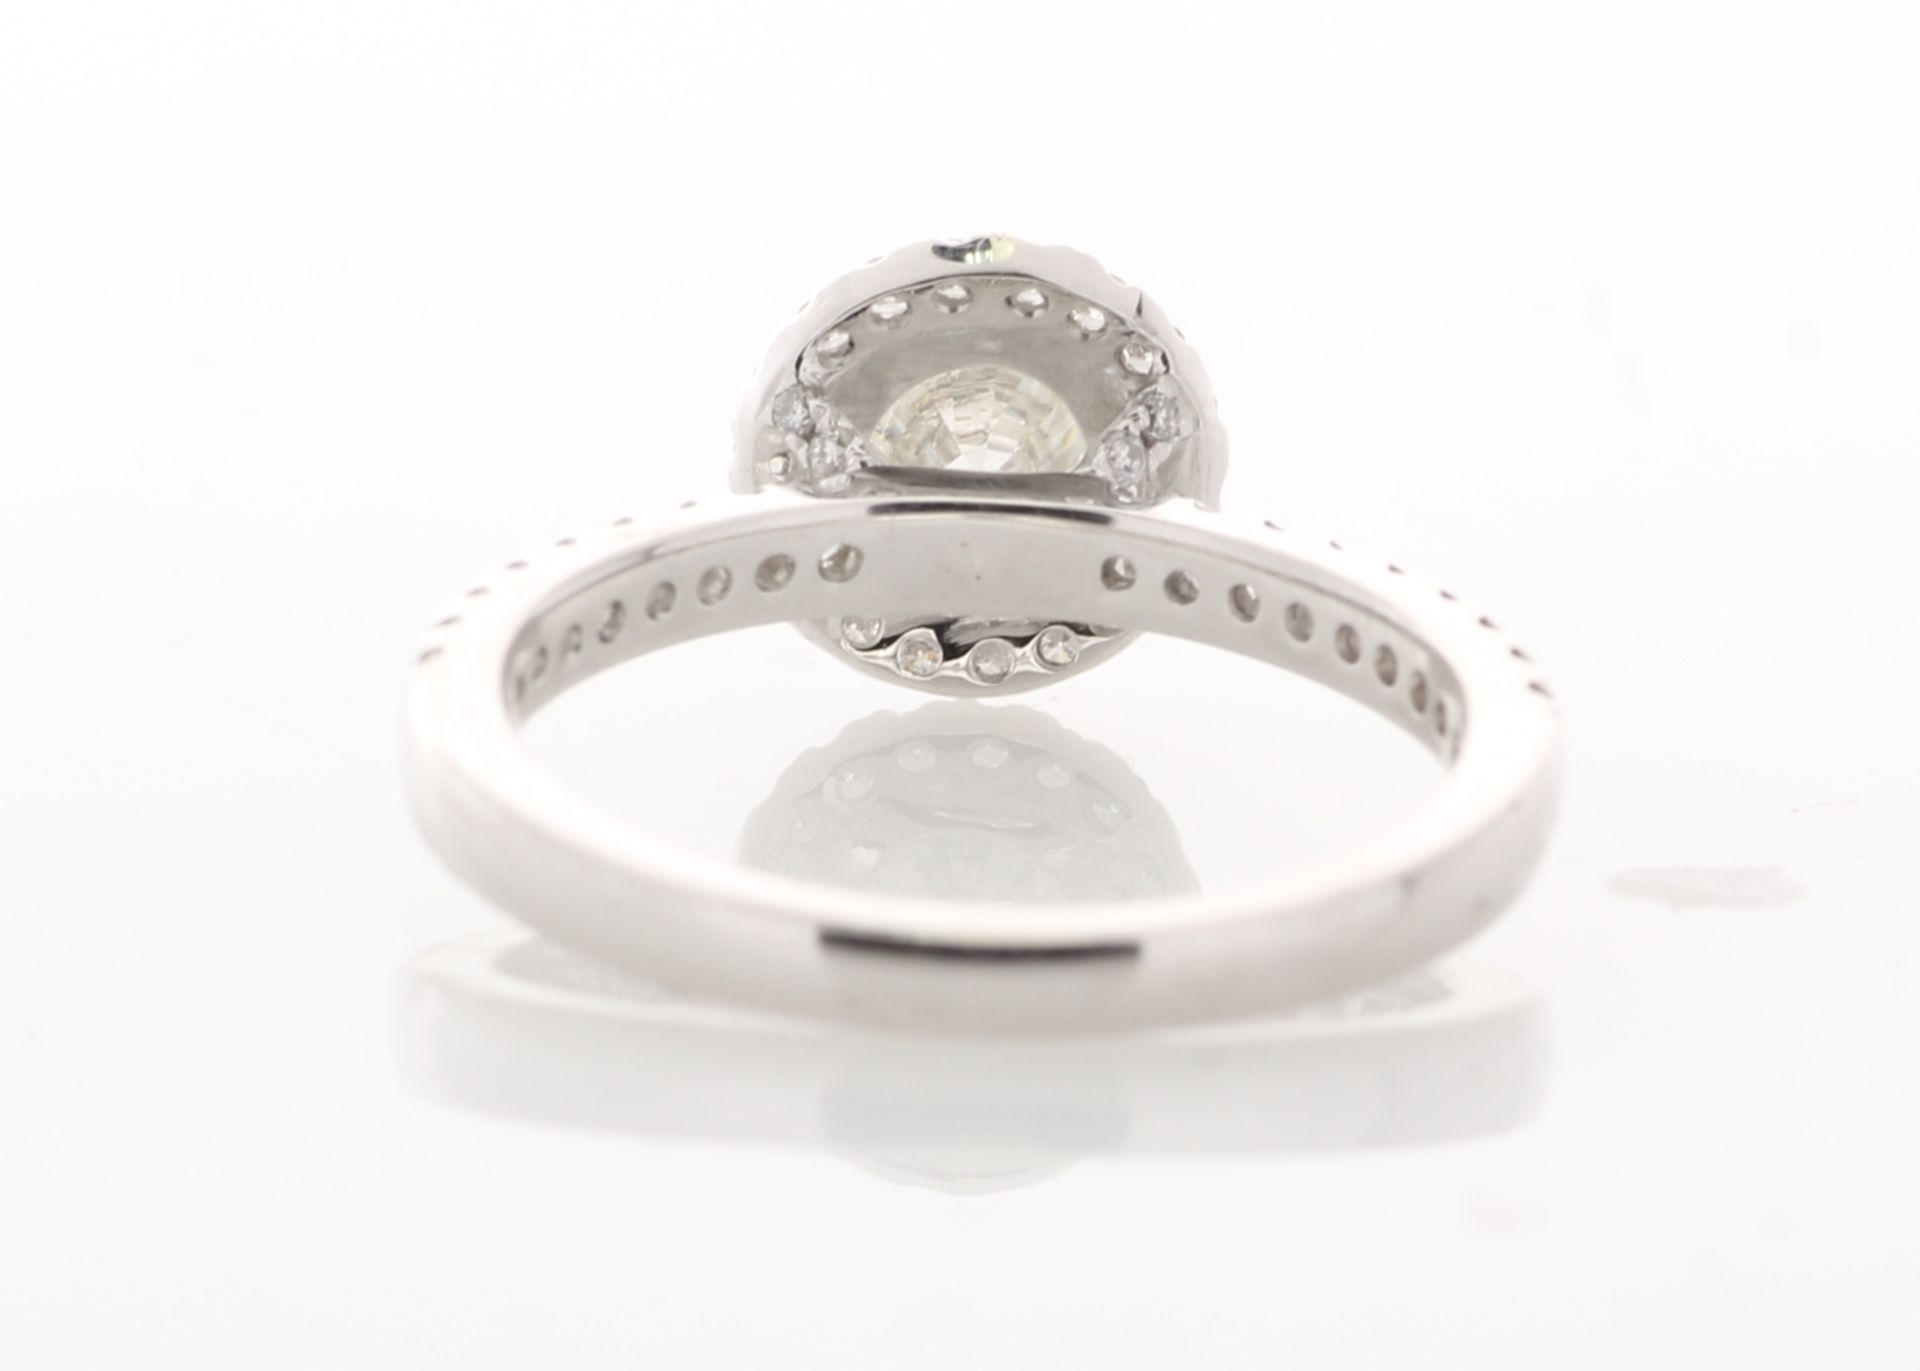 18ct White Gold Single Stone With Halo Setting Ring (1.01) 1.37 Carats - Valued by IDI £20,000. - Image 3 of 5